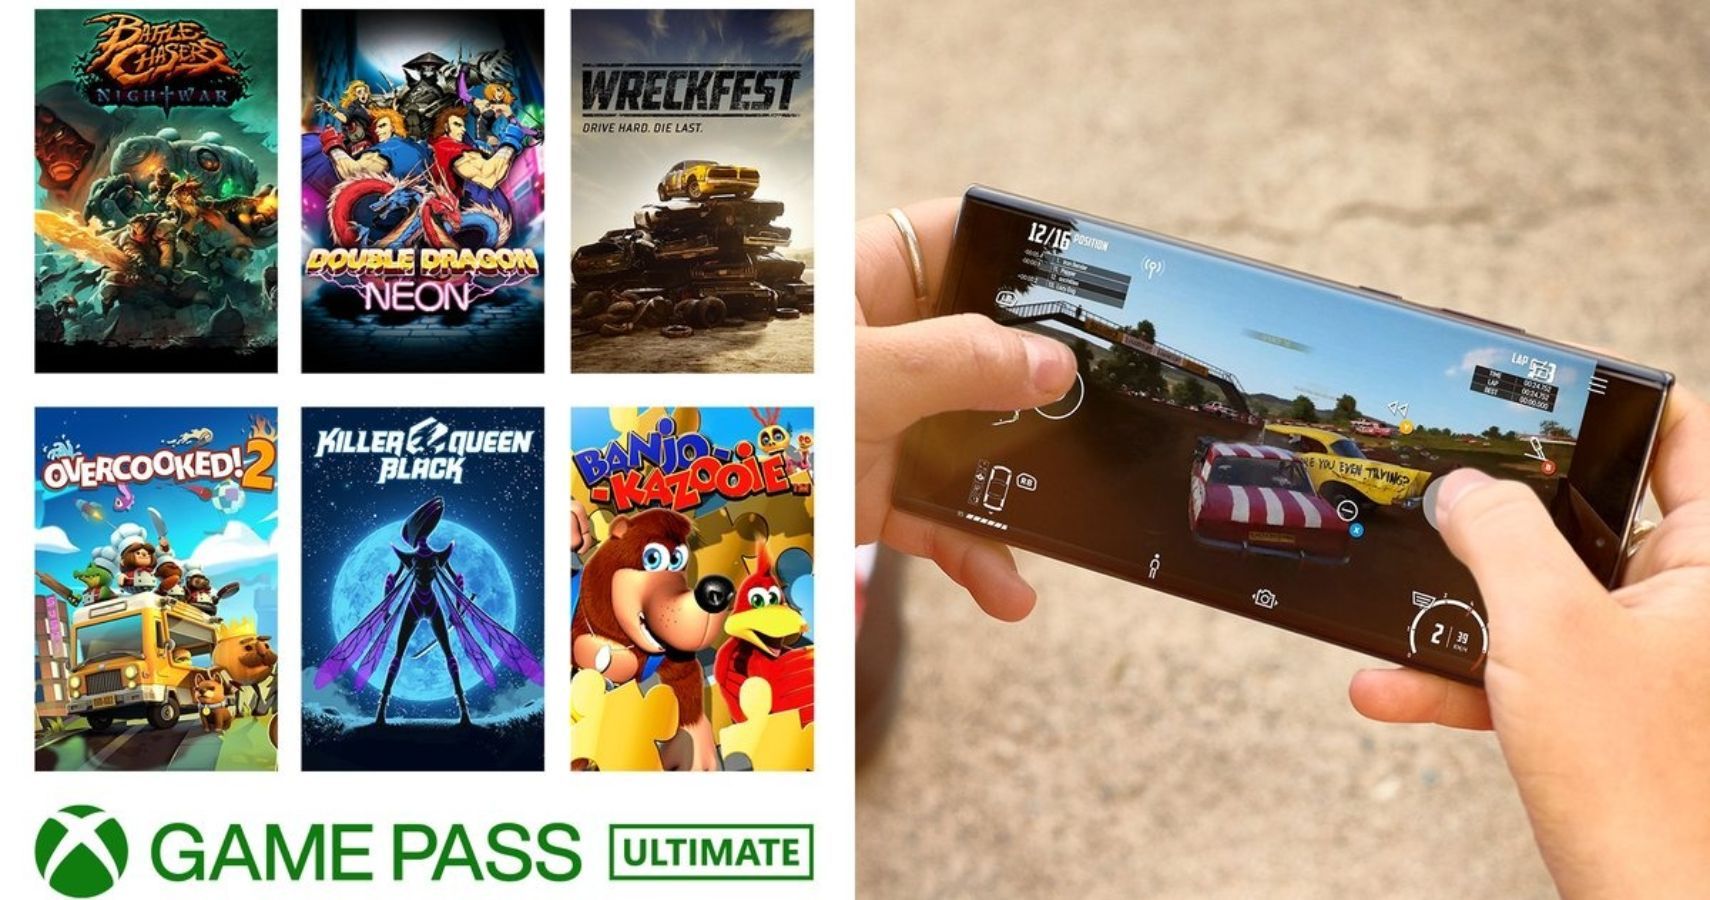 Every game with touch controls on Xbox Game Pass (xCloud) for